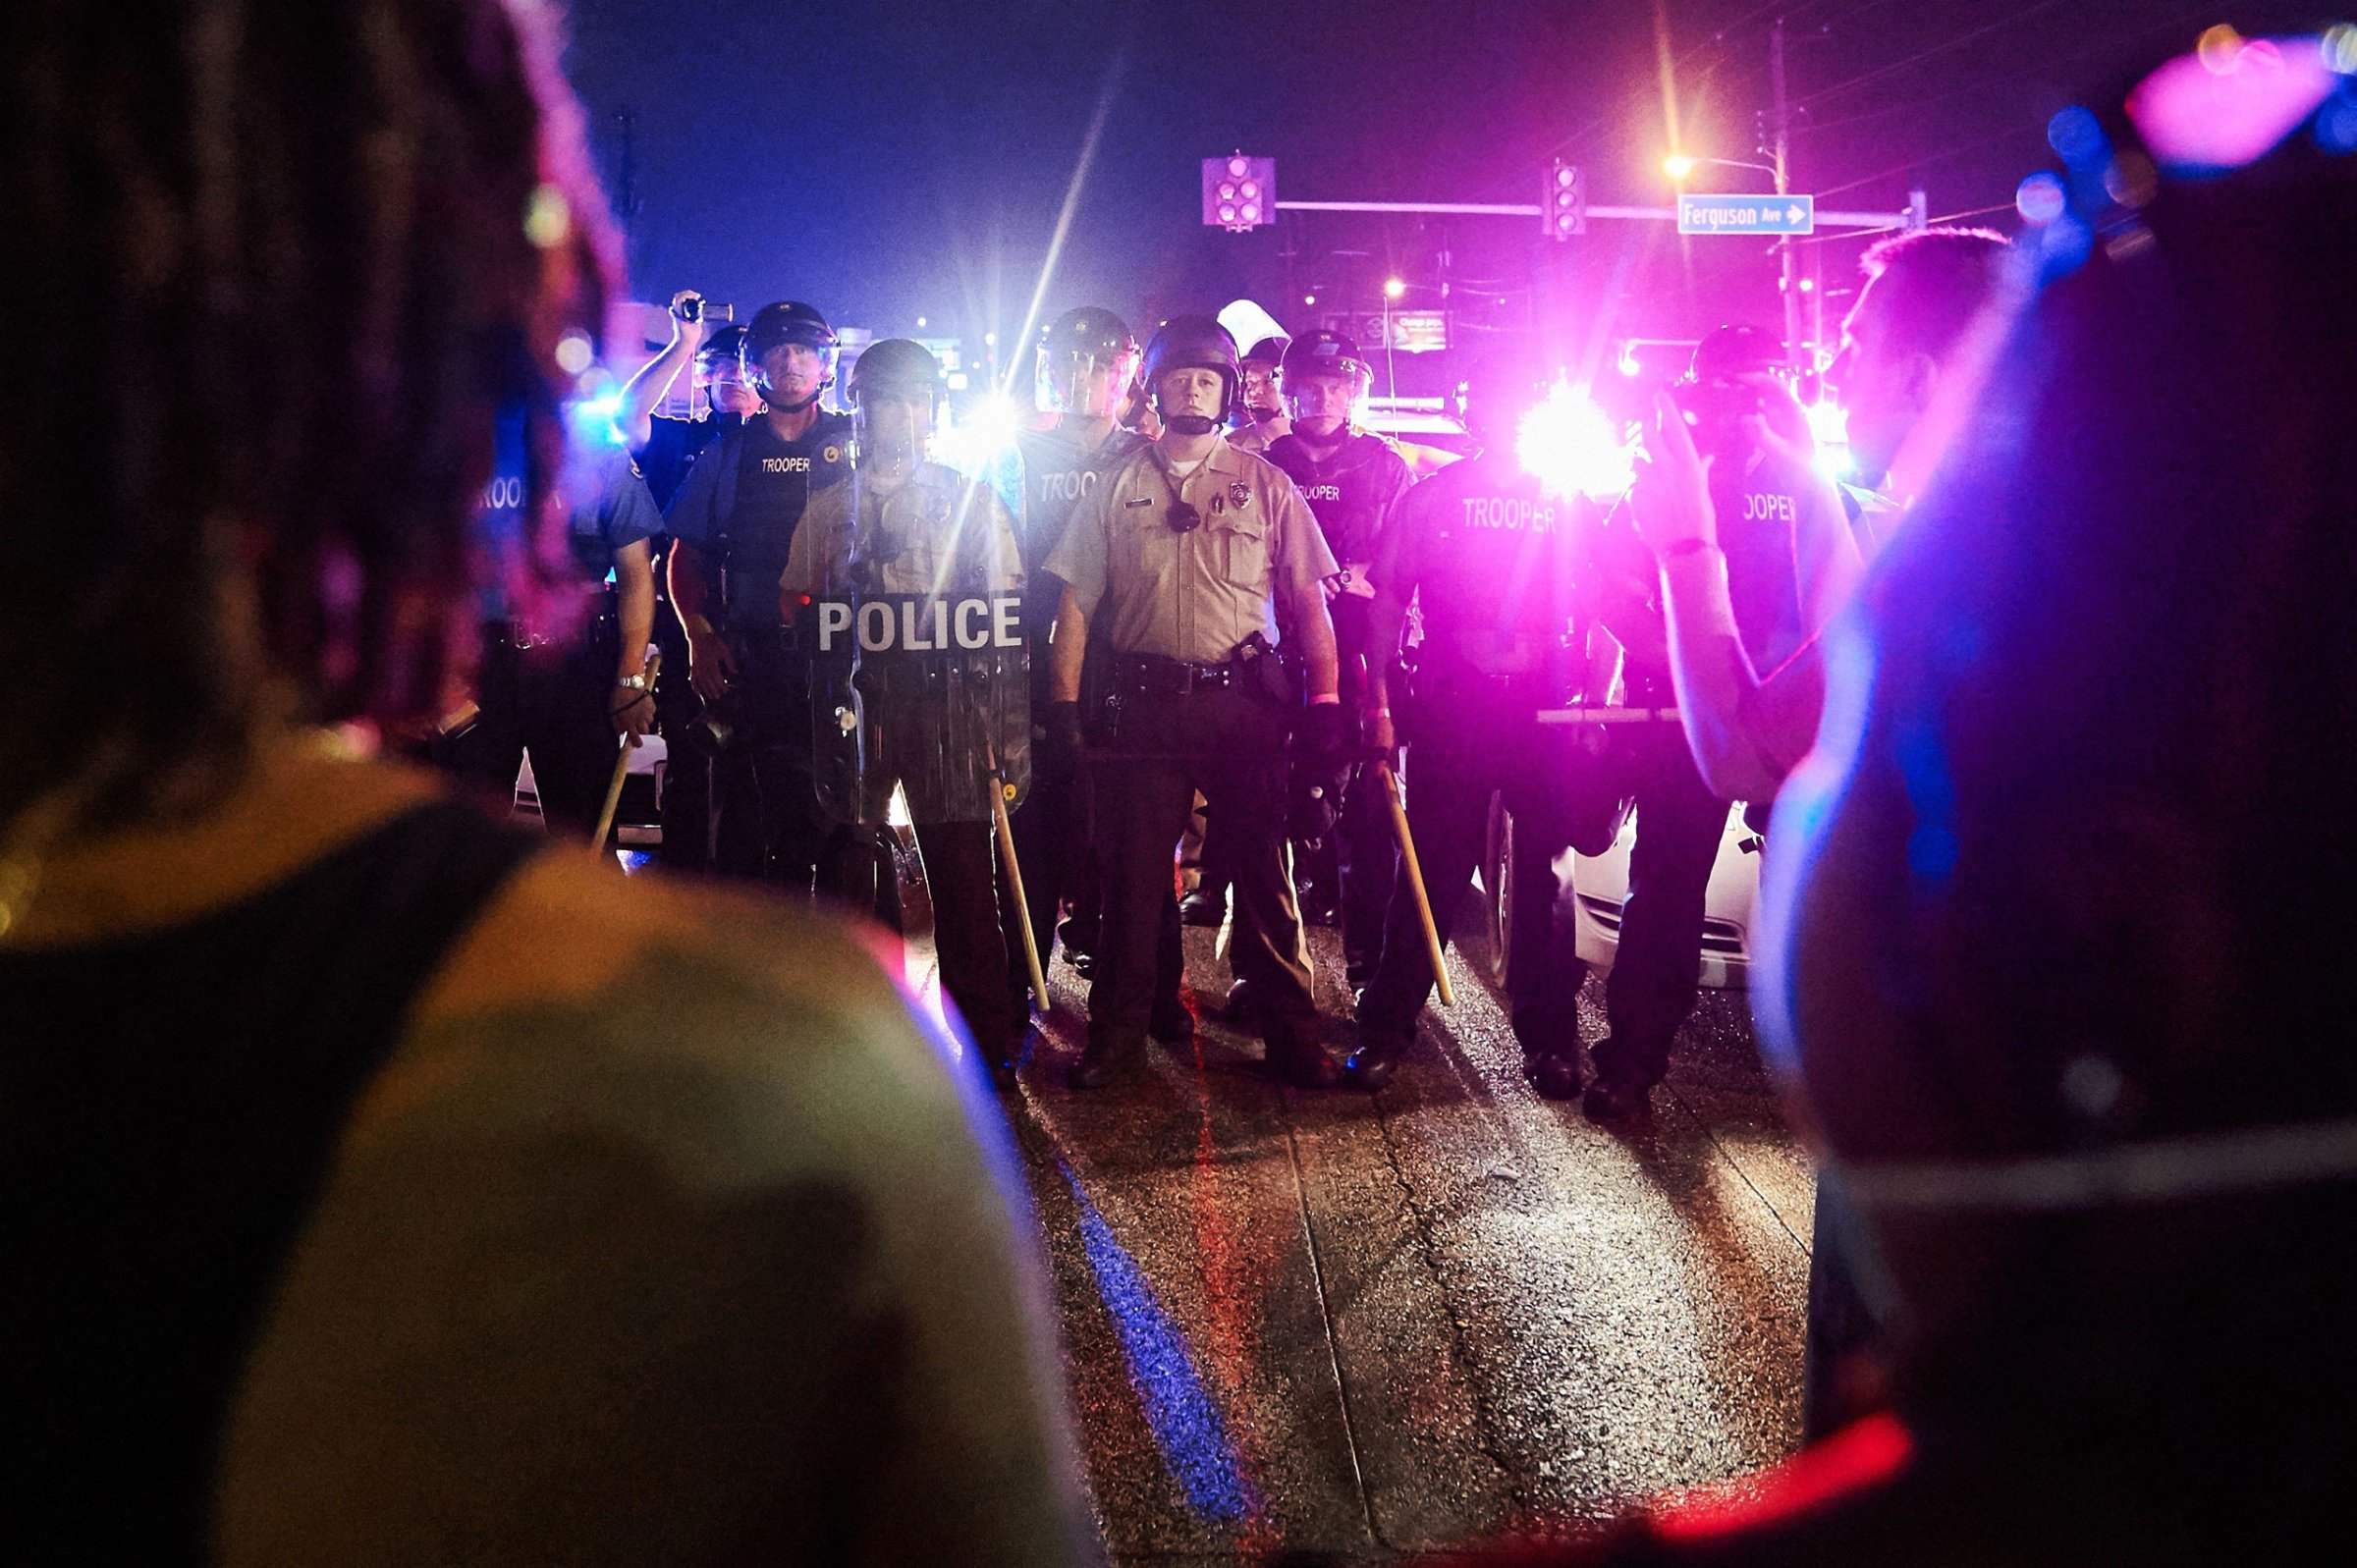 St. Louis County Police and Missouri State Highway Patrol troopers (C) stand guard as protesters (foreground) march on West Florissant Avenue in Ferguson, Missouri on August 9, 2015. A day of peaceful remembrance marking the anniversary of 18-year-old black teen Michael Brown's killing by police in the US city of Ferguson came to a violent end on August 9 as gunfire left at least one protester injured. AFP PHOTO / MICHAEL B. THOMASMichael B. Thomas/AFP/Getty Images